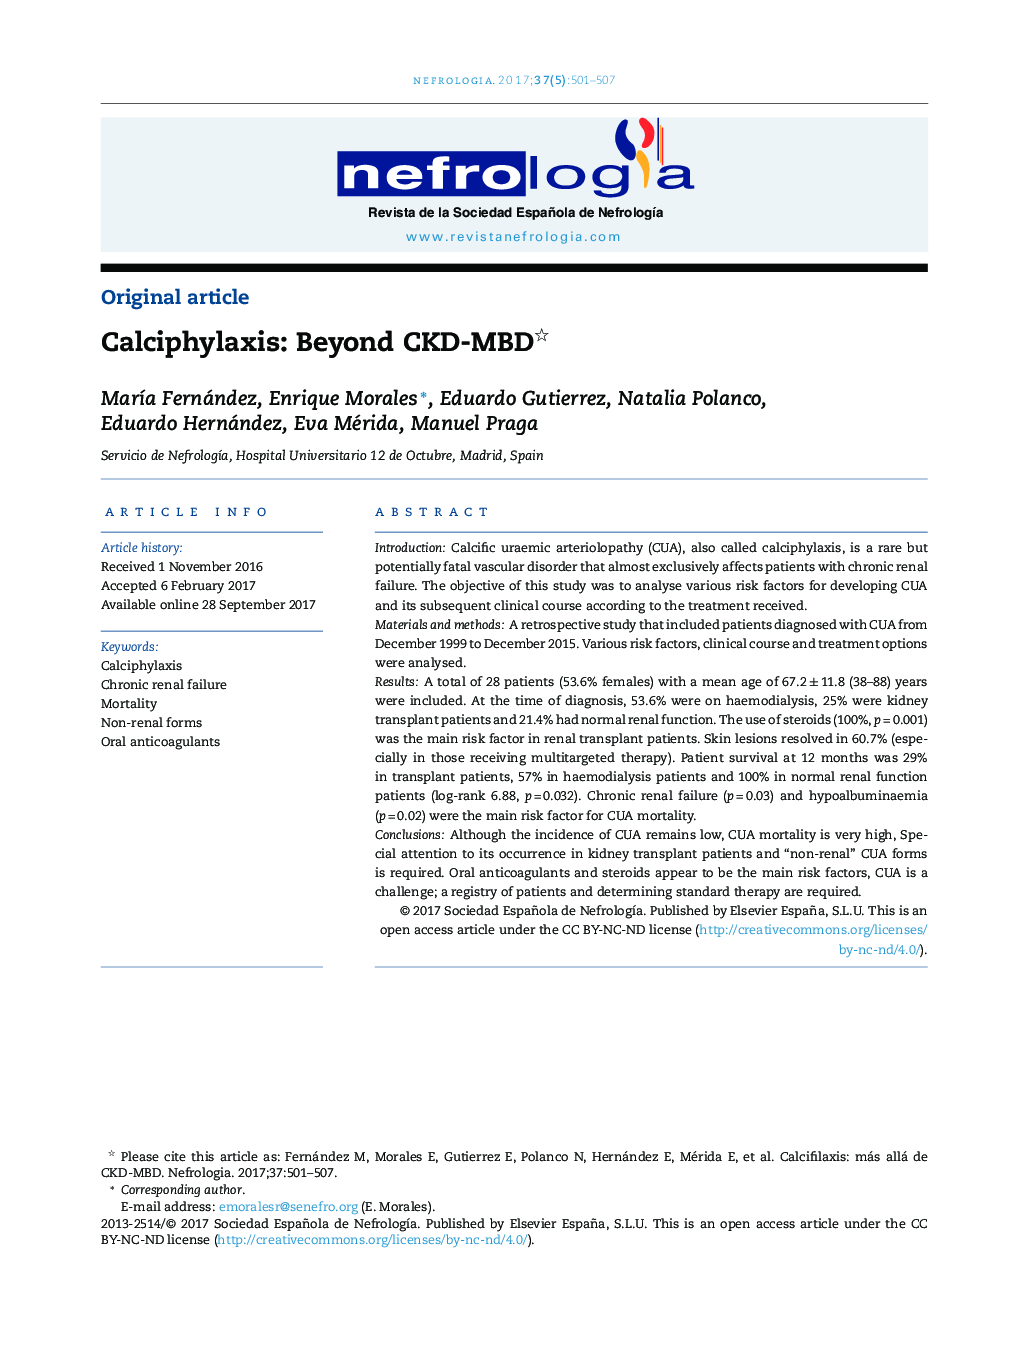 Calciphylaxis: Beyond CKD-MBD